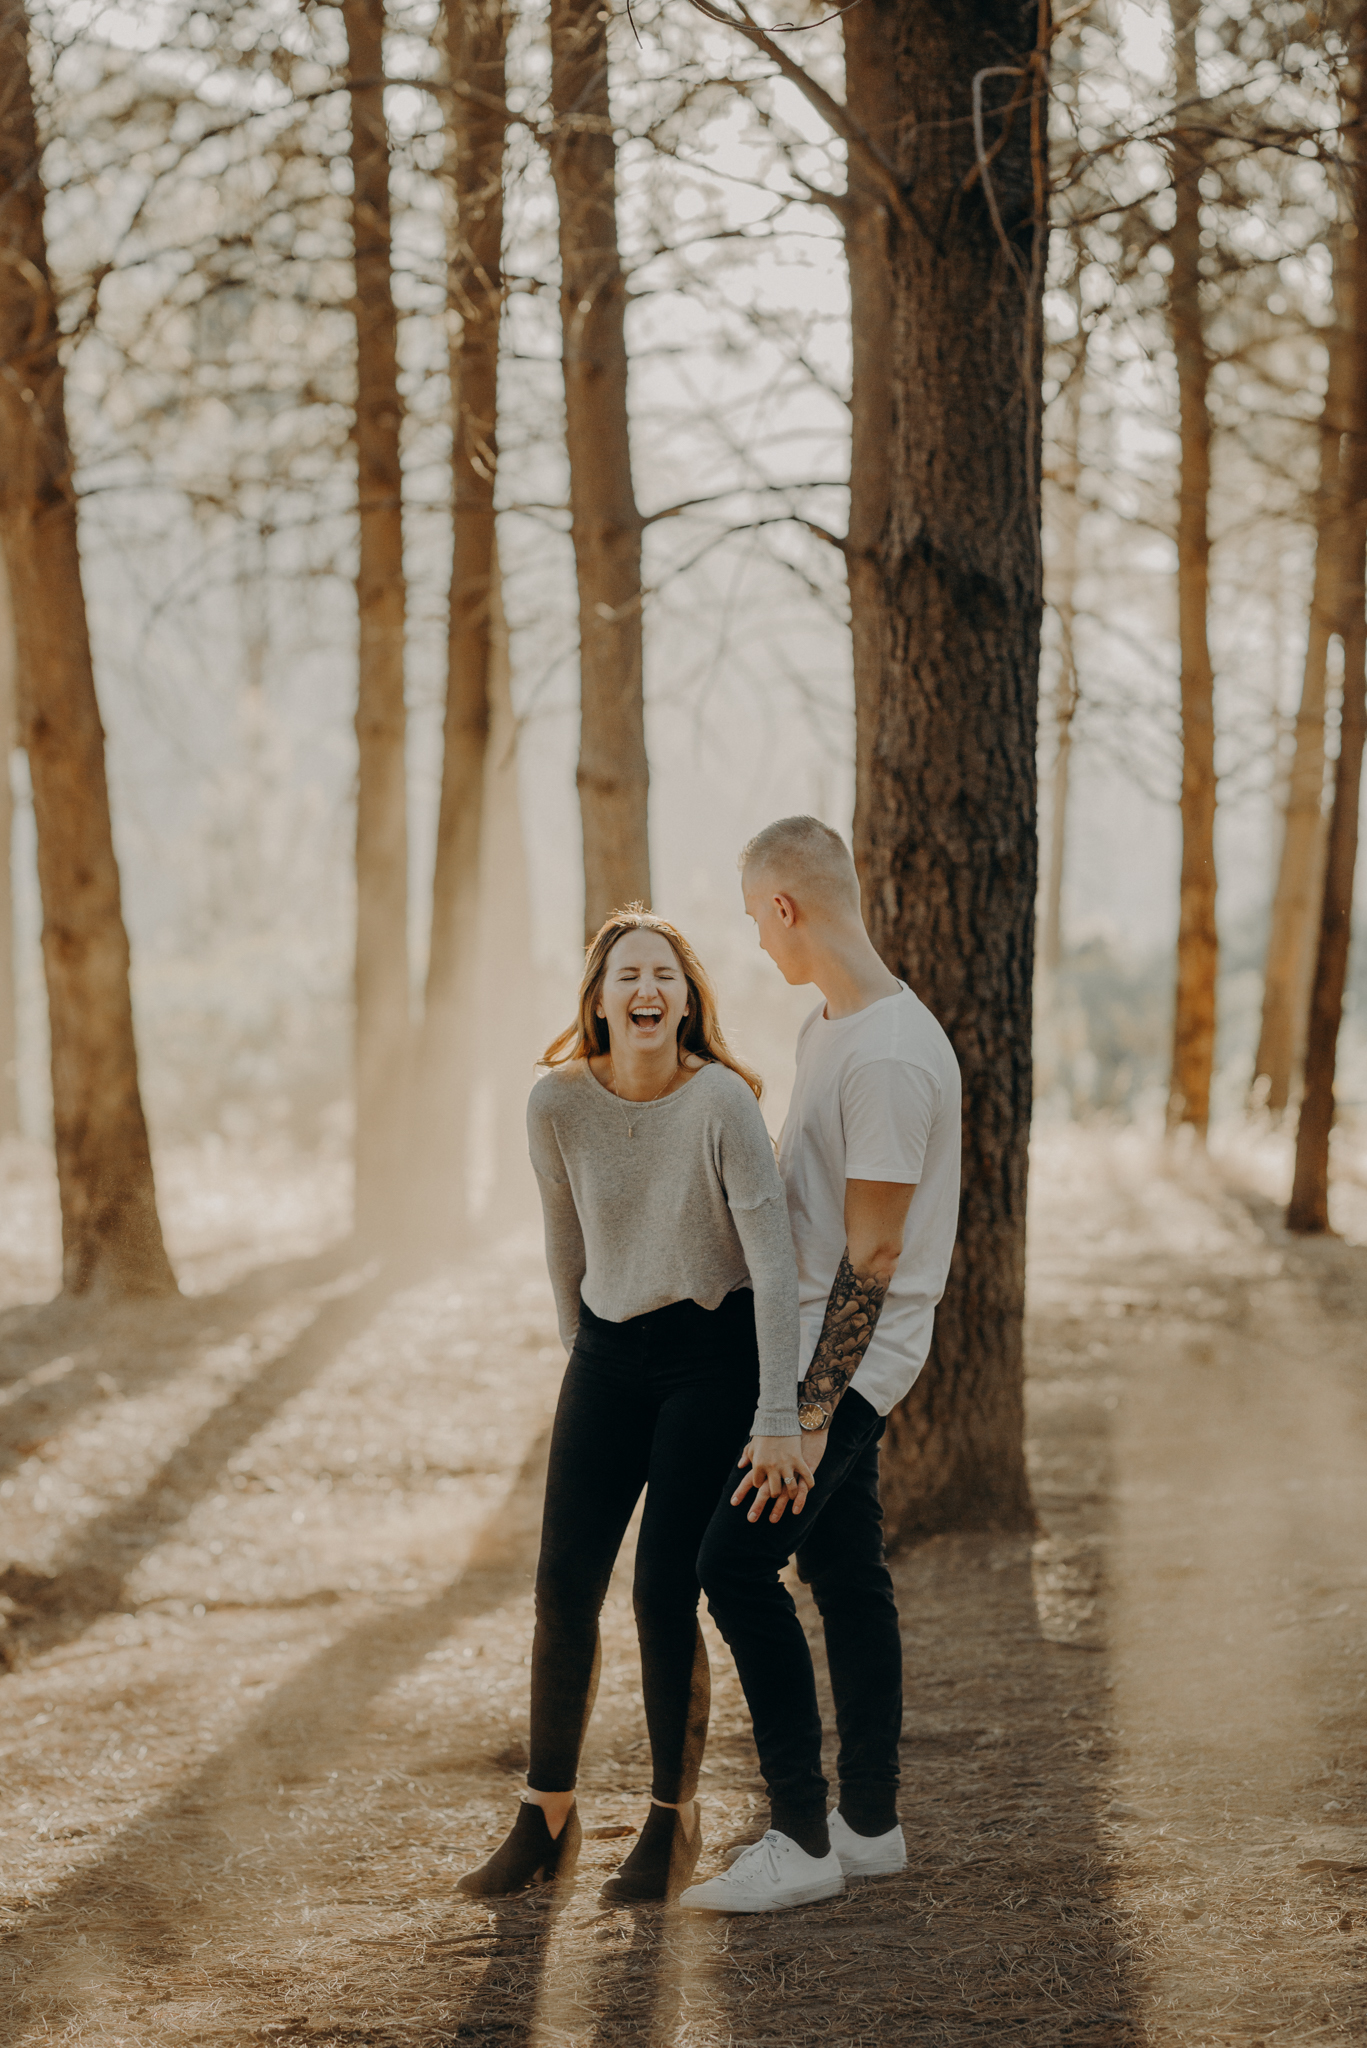 Isaiah + Taylor Photography - Los Angeles Forest Engagement, Laid-back Wedding Photographer-077.jpg